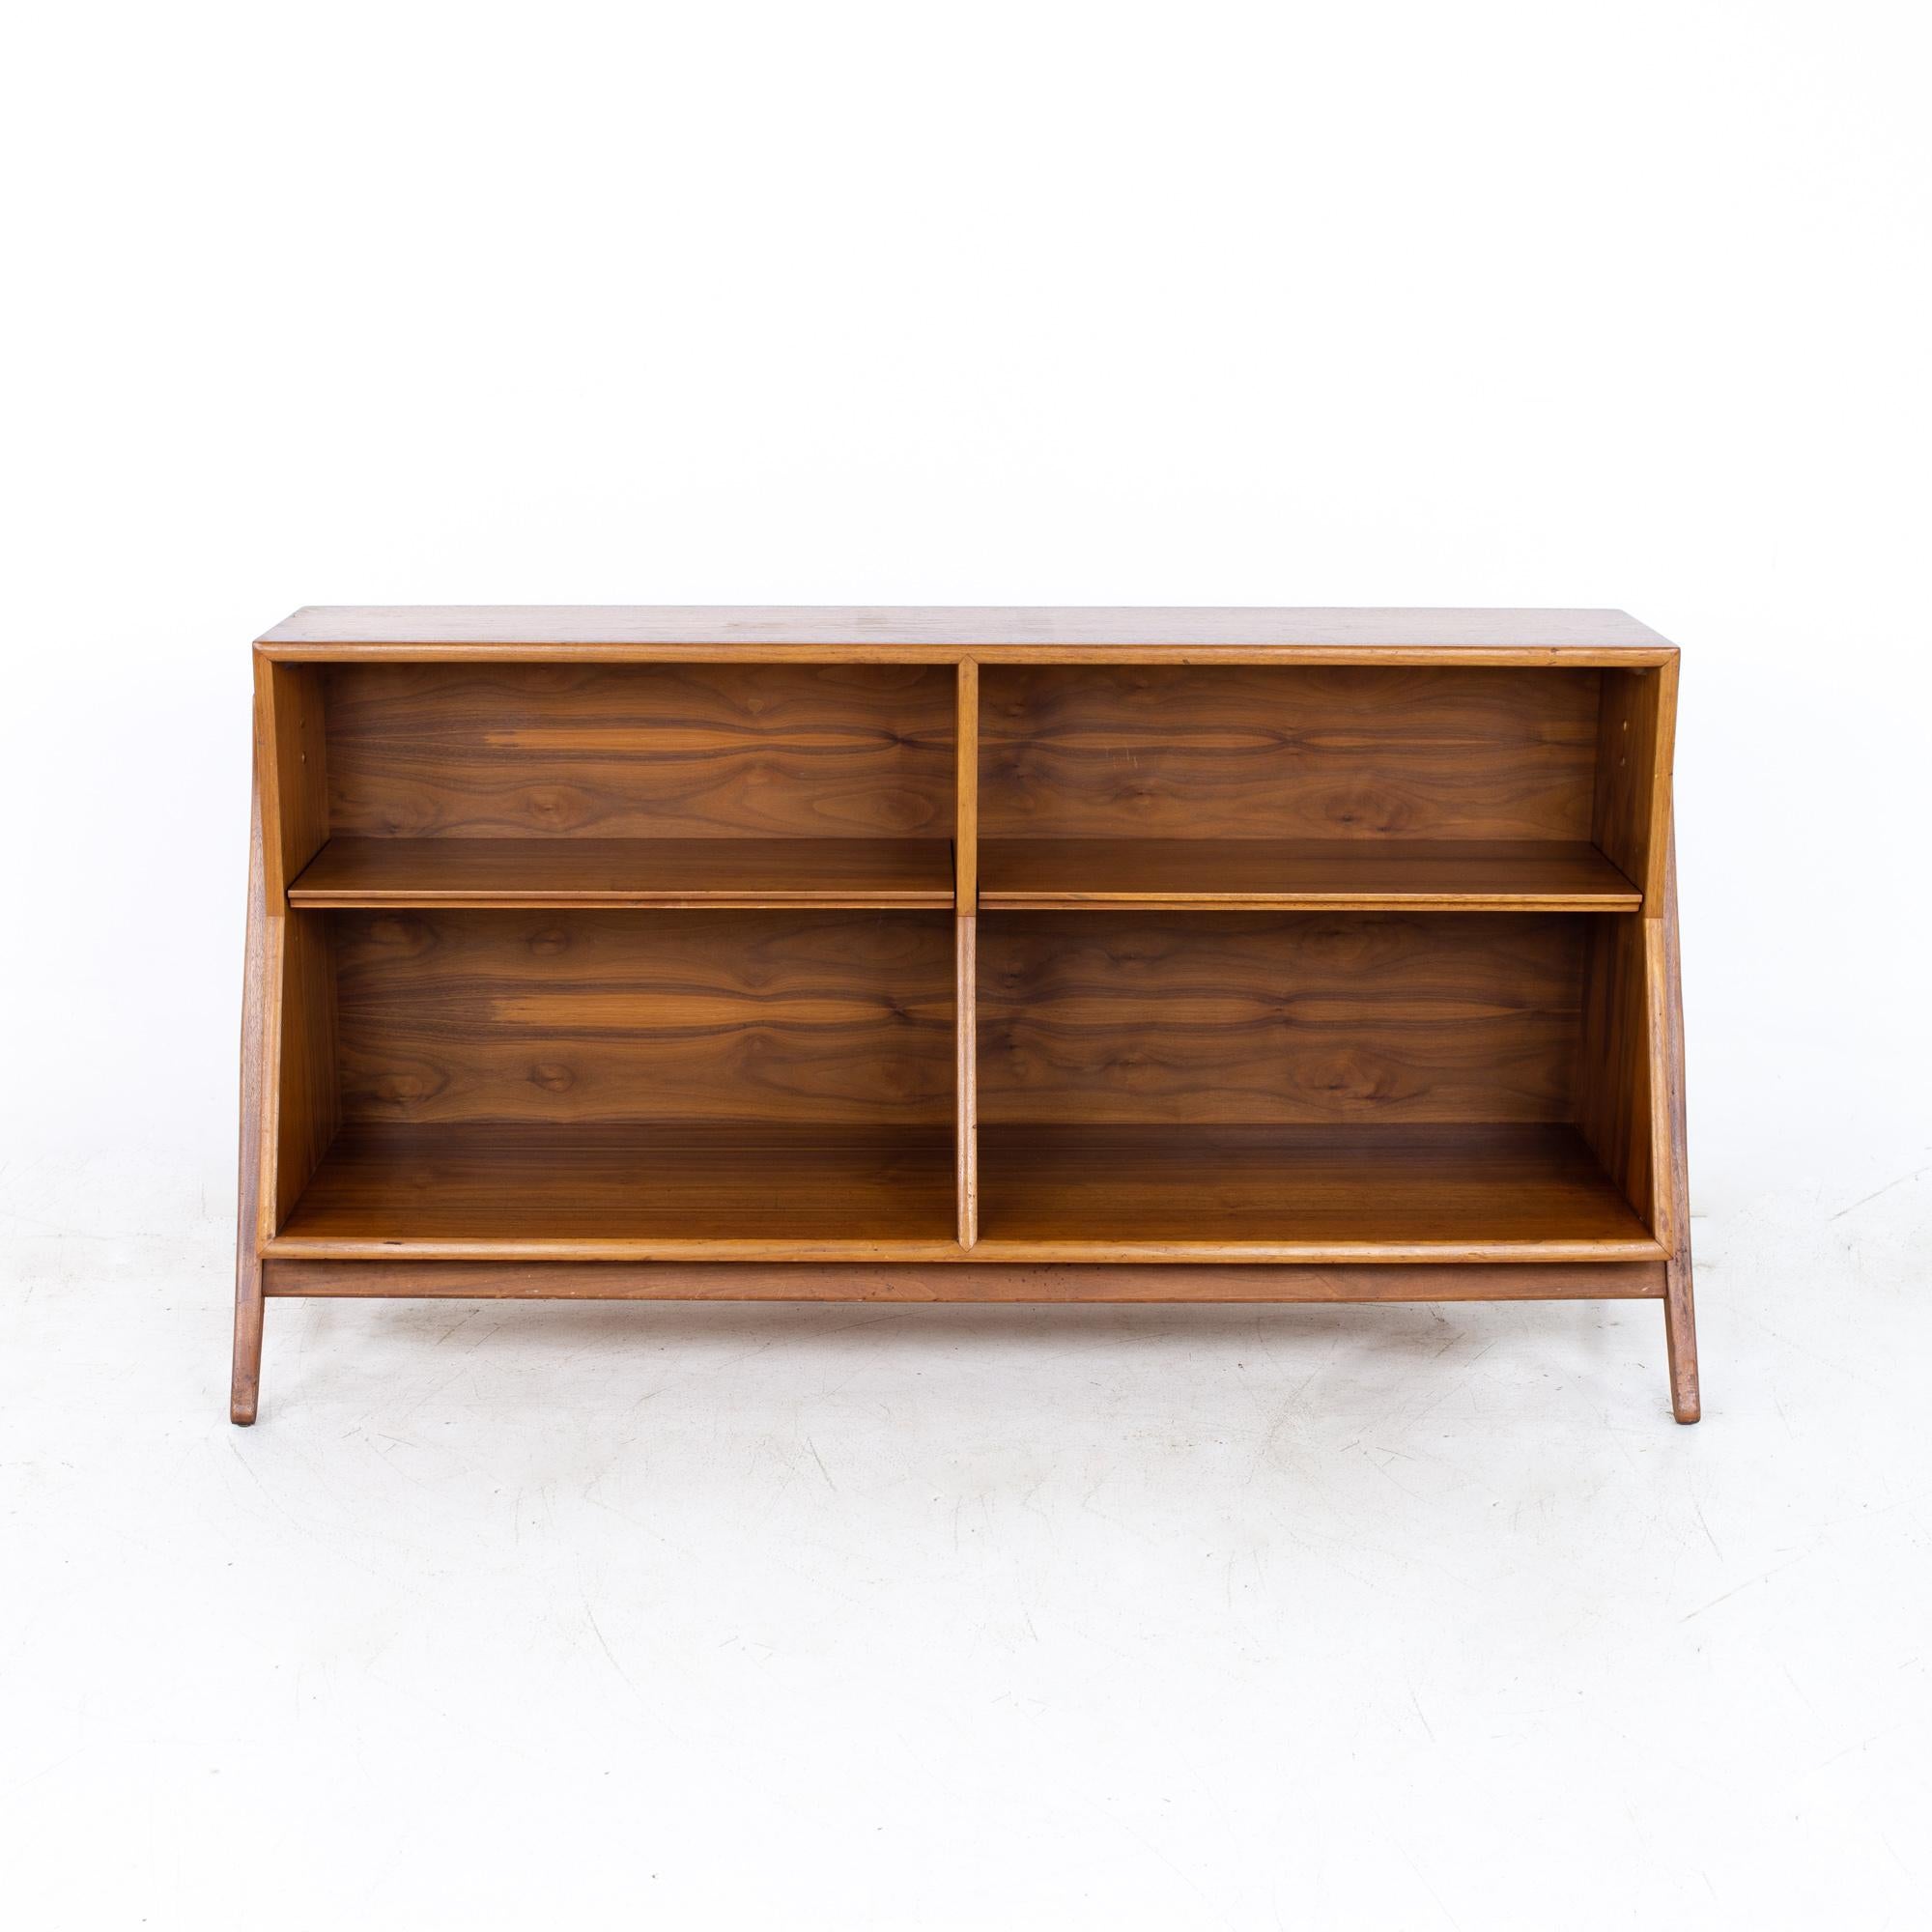 Kipp Stewart for Drexel Declaration mid century bookcase

Bookcase measures: 57 wide x 12.5 deep x 31 inches high

?All pieces of furniture can be had in what we call restored vintage condition. That means the piece is restored upon purchase so